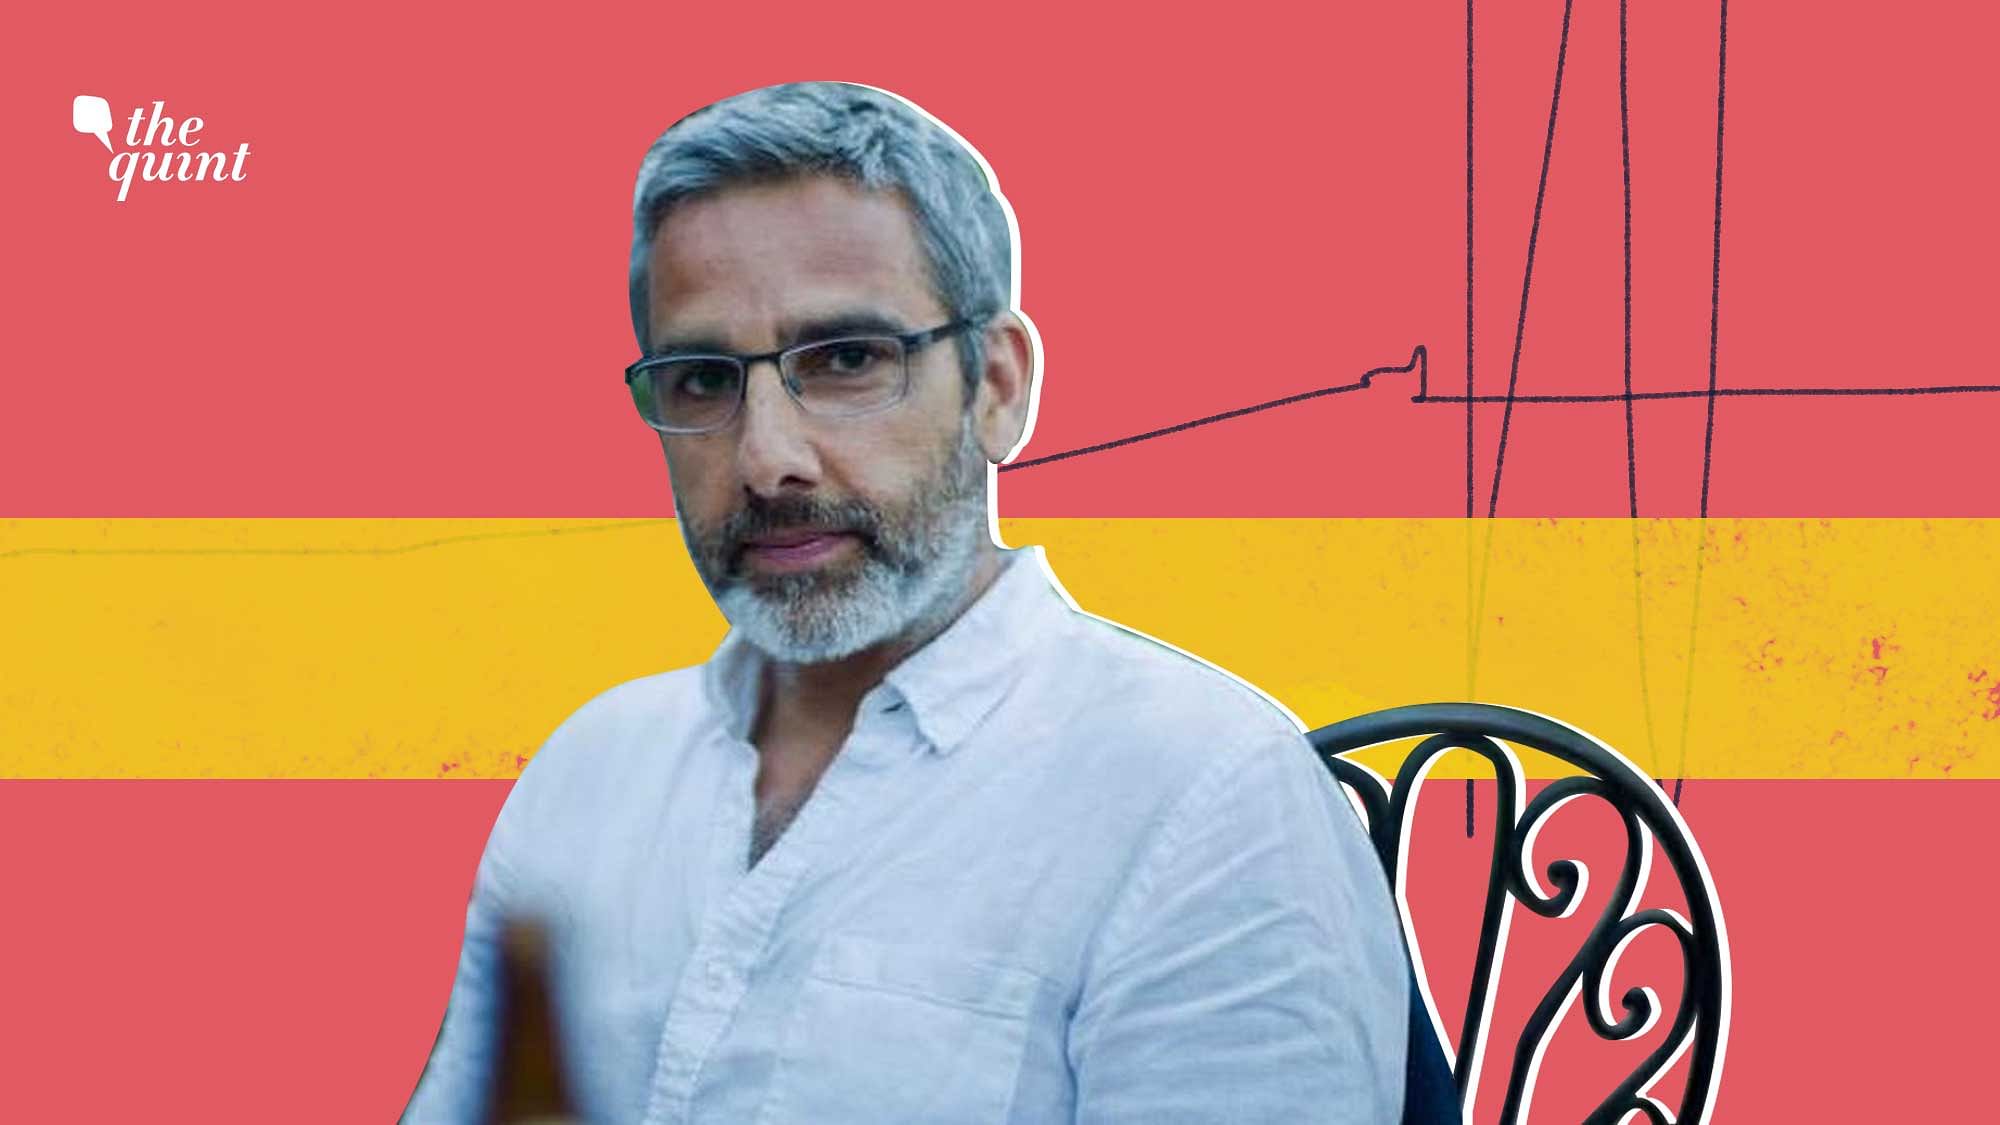 Parekh spoke to The Quint about his identity, ‘Succession’, and his journey from a cinematographer to director. Watch him get candid in the exclusive interview.